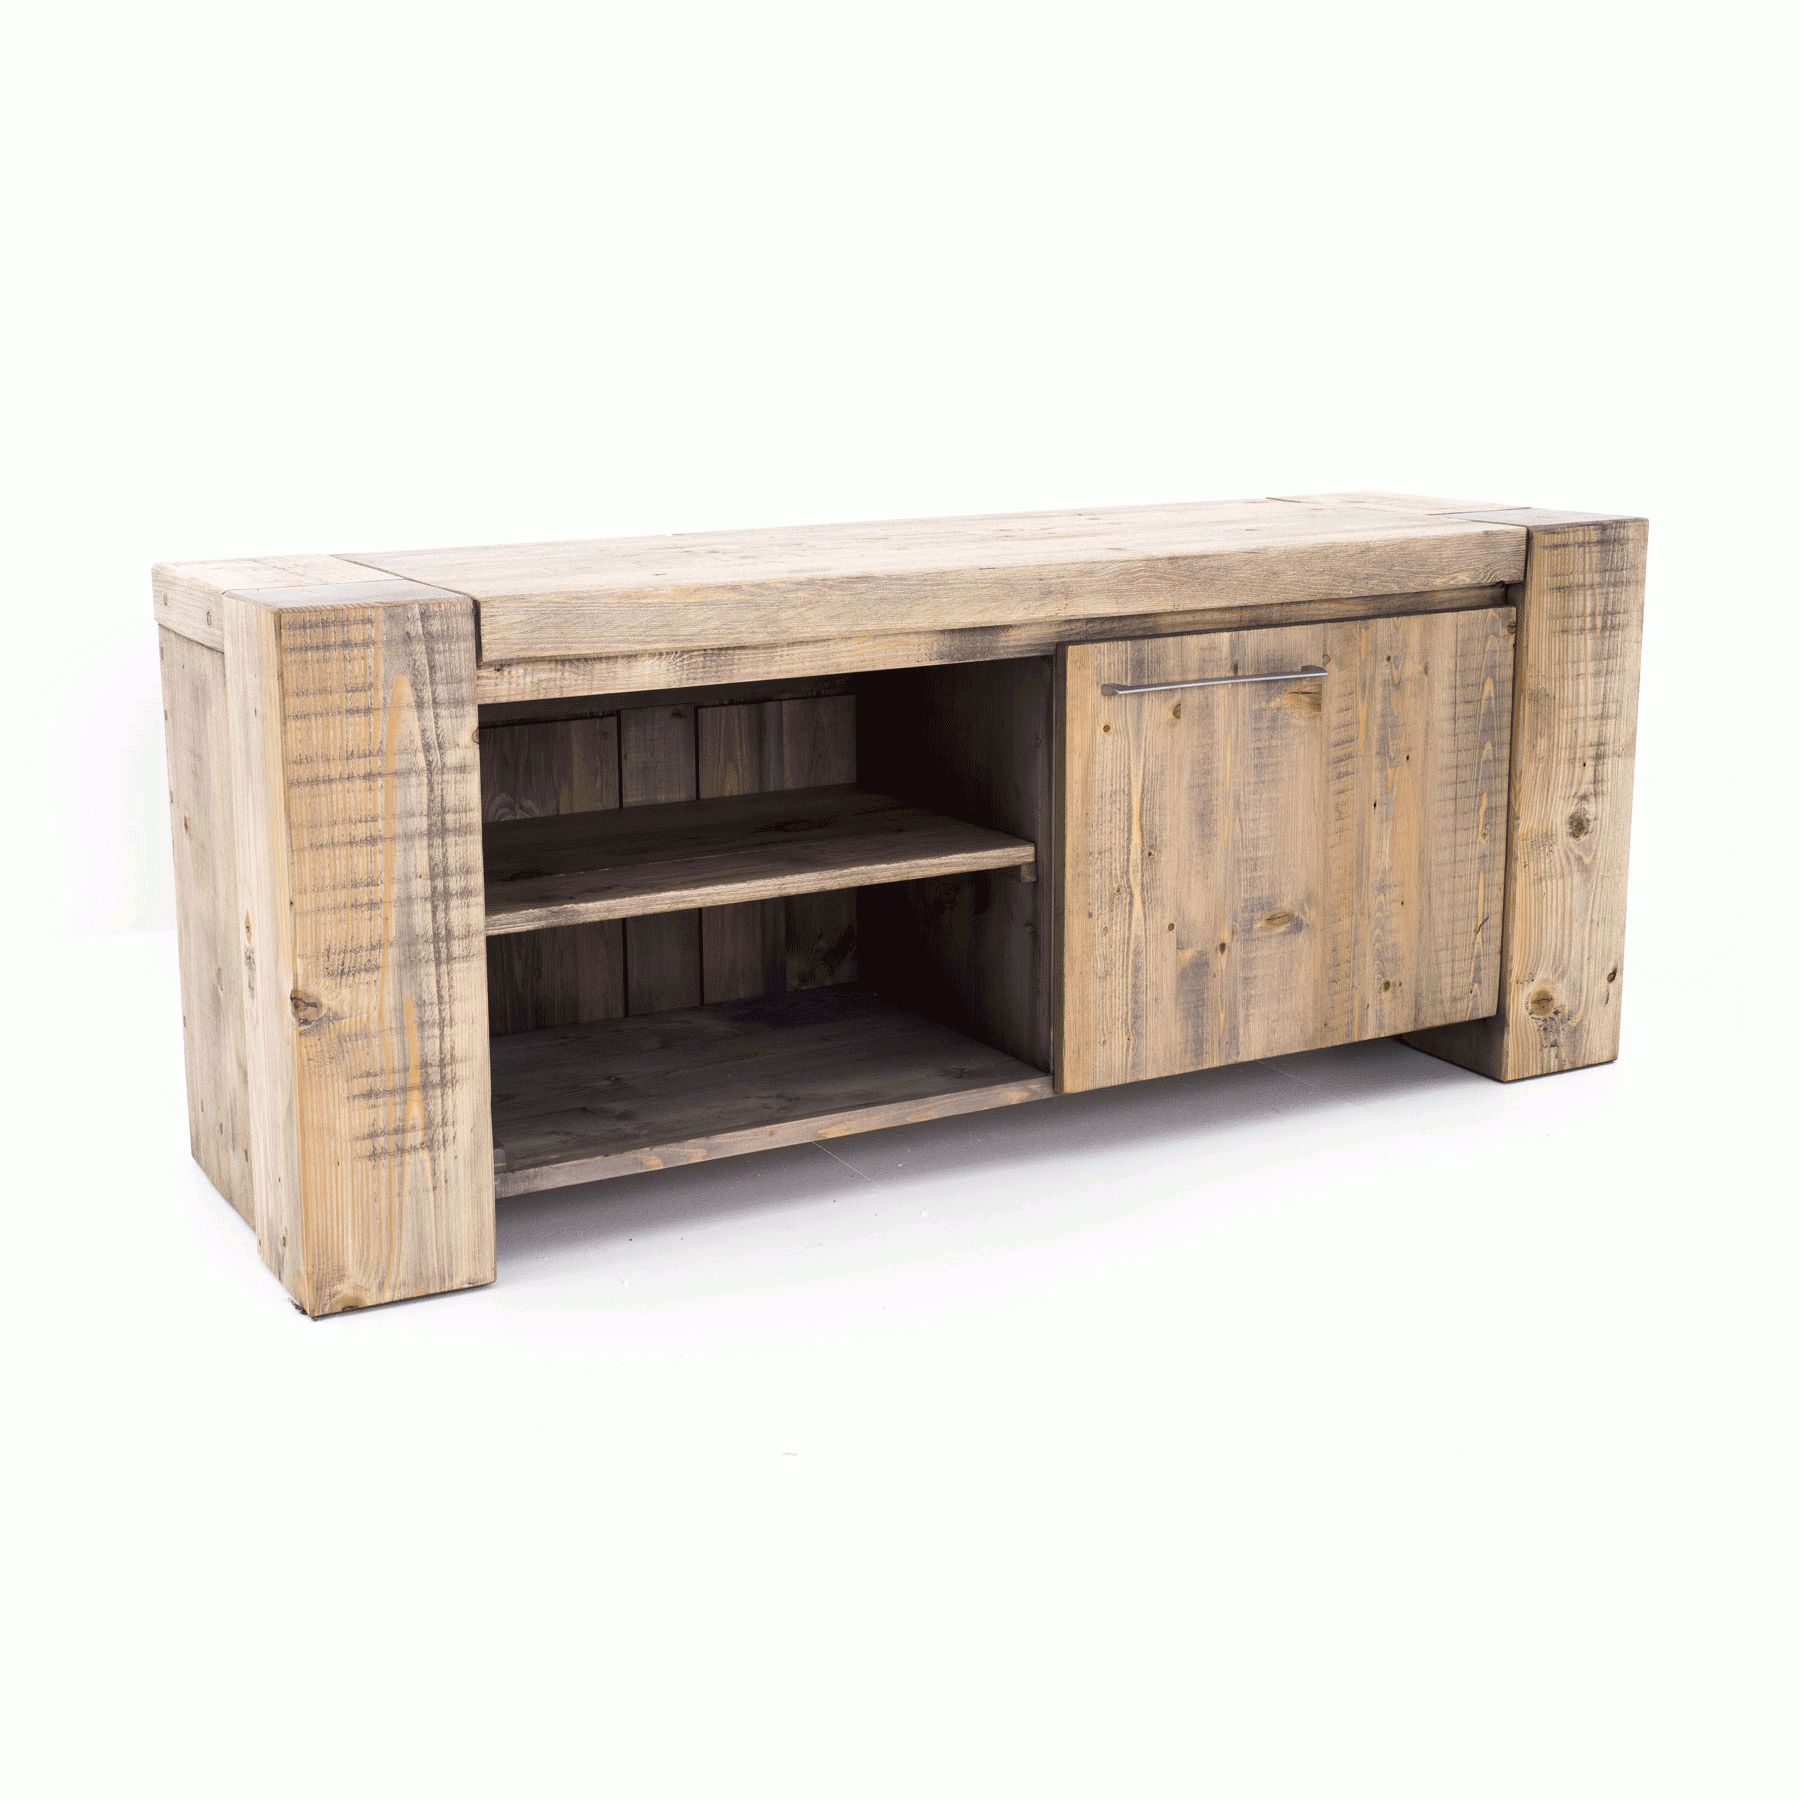 Montana Reclaimed Wood Tv Stand For Up To 70" Tvs In 2017 Wood Tv Stands (View 12 of 20)